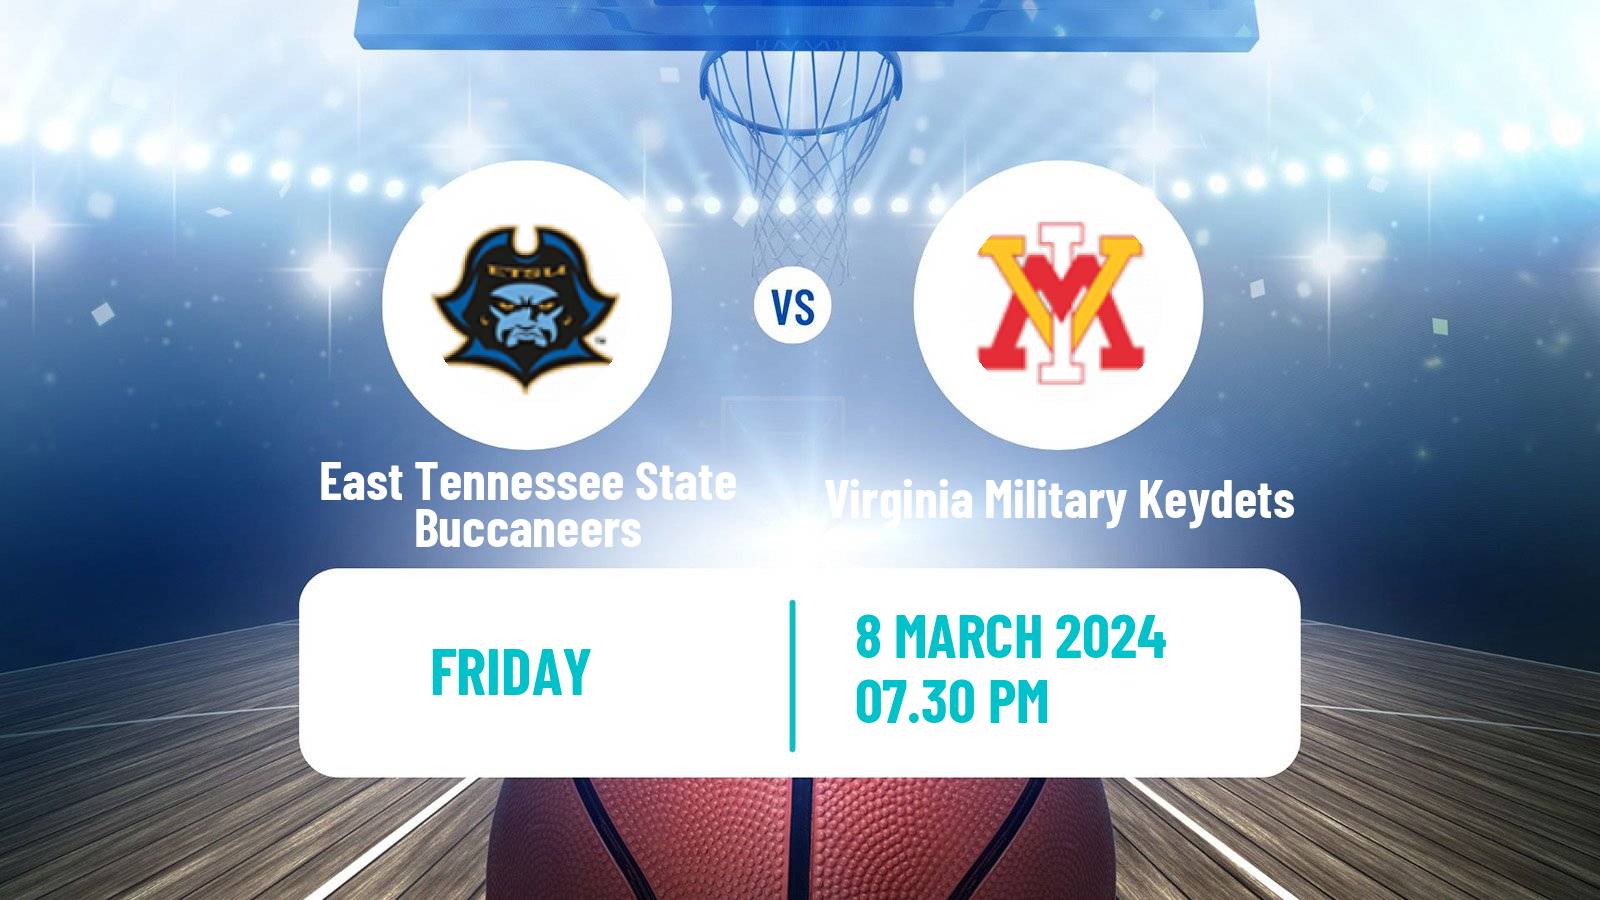 Basketball NCAA College Basketball East Tennessee State Buccaneers - Virginia Military Keydets